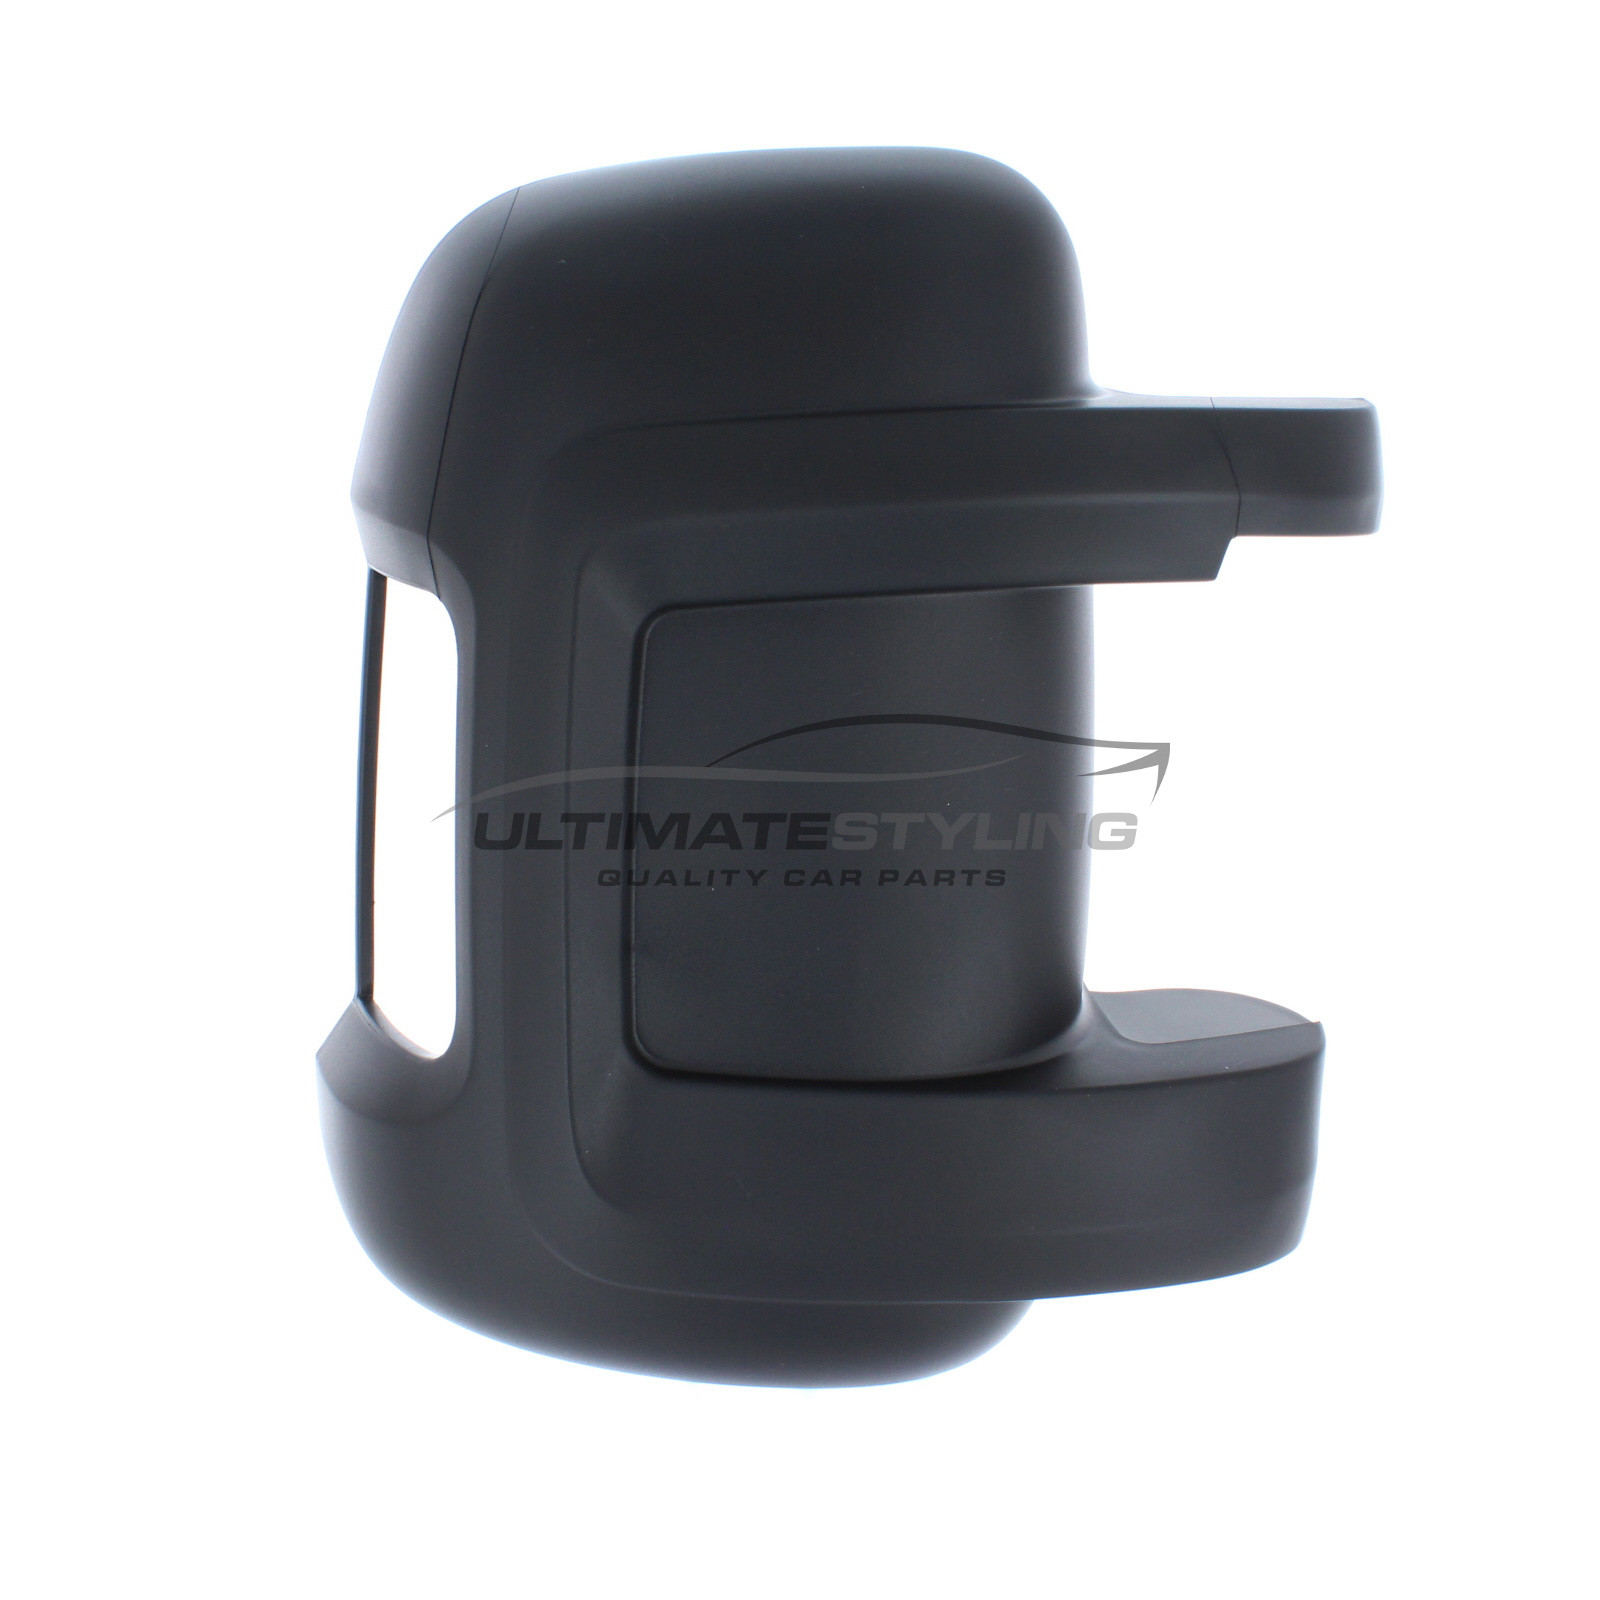 Citroen Relay 2006->, Fiat Ducato 2006->, Peugeot Boxer 2006->, Vauxhall Movano 2021-> Wing Mirror Cover Cap Casing Black (Textured) Drivers Side (RH) to suit Short Arm Mirror